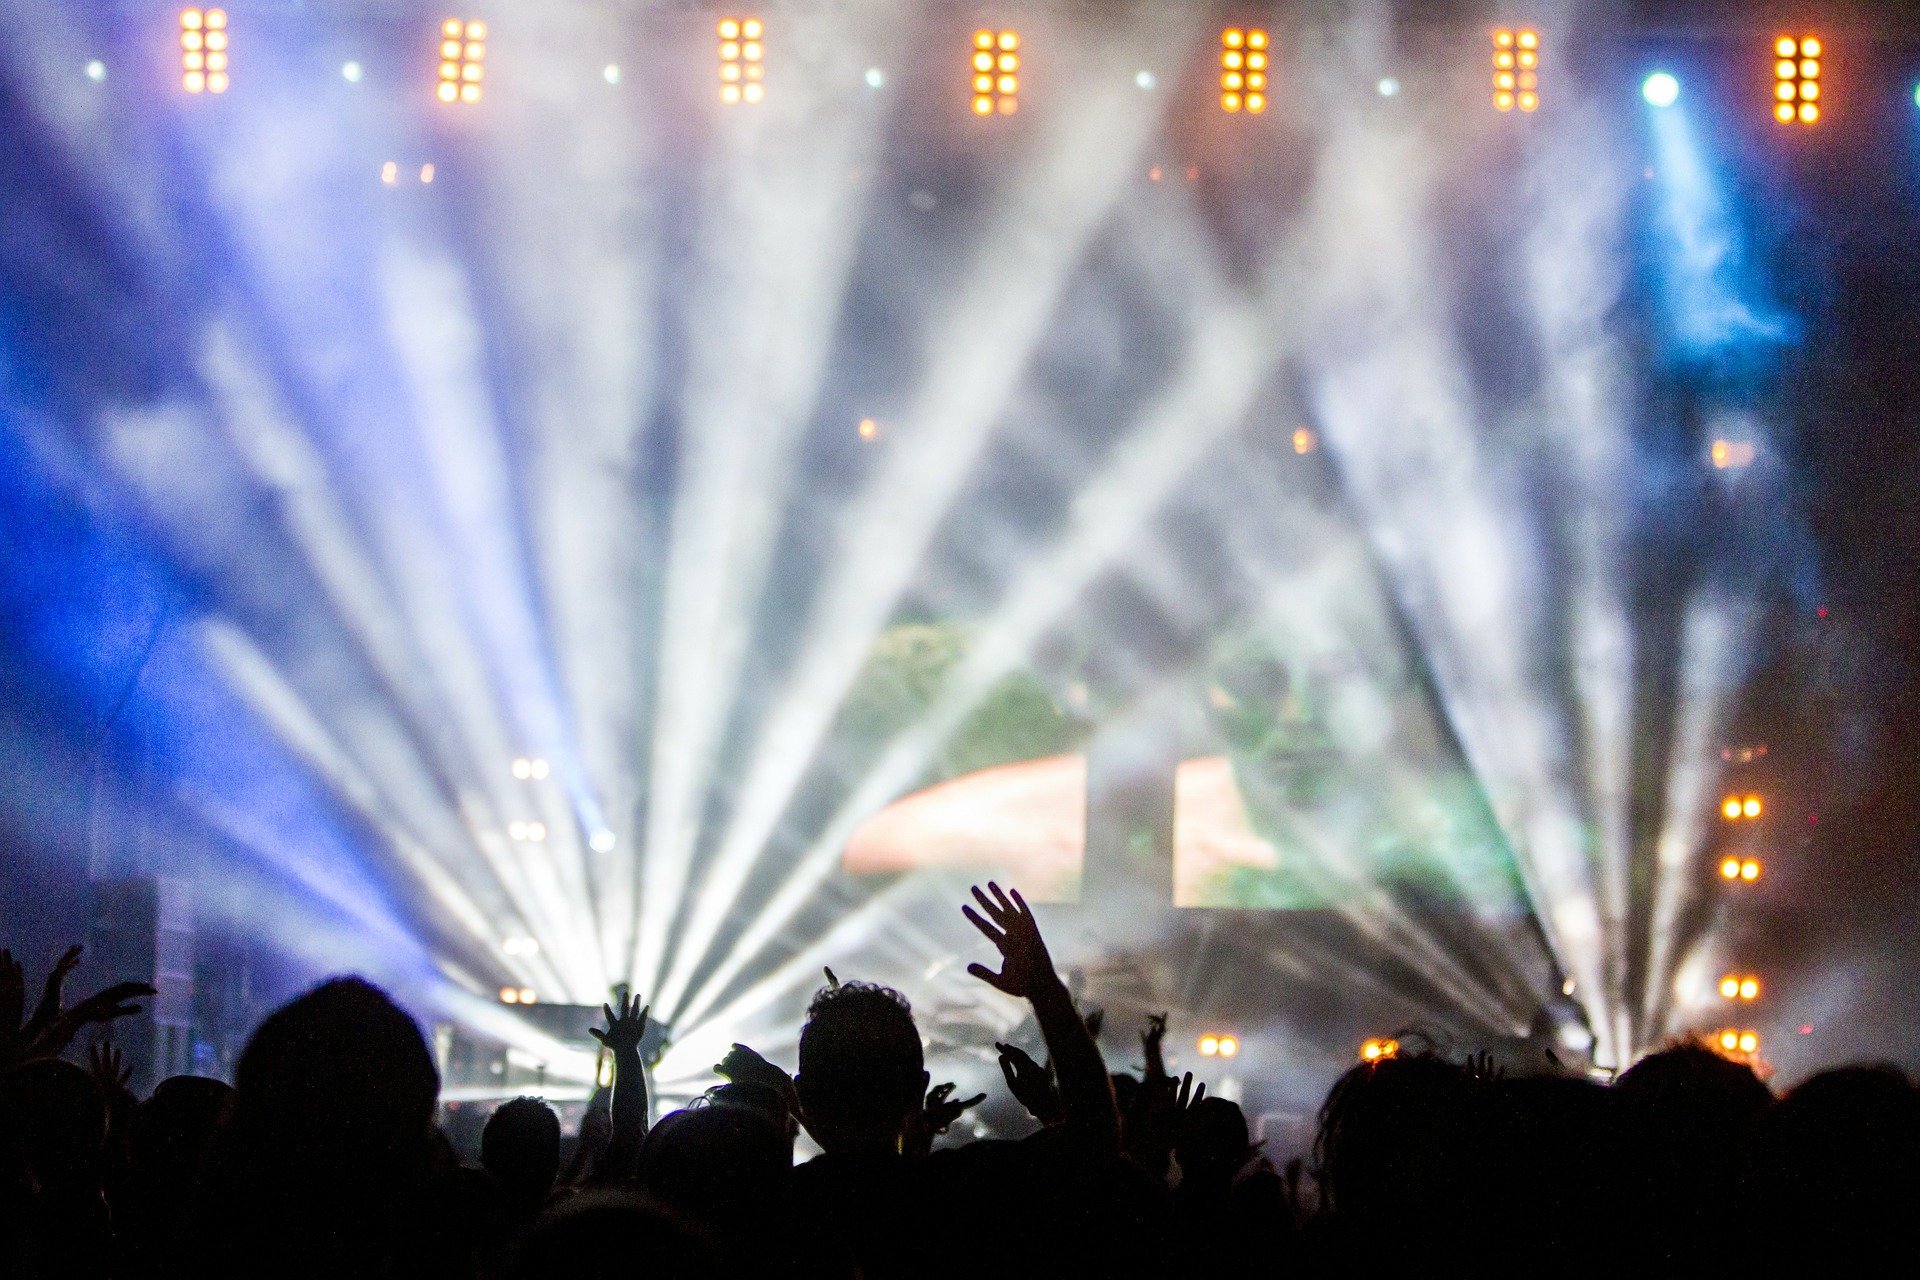 How do emotions help construct our cultural identity in music festivals?